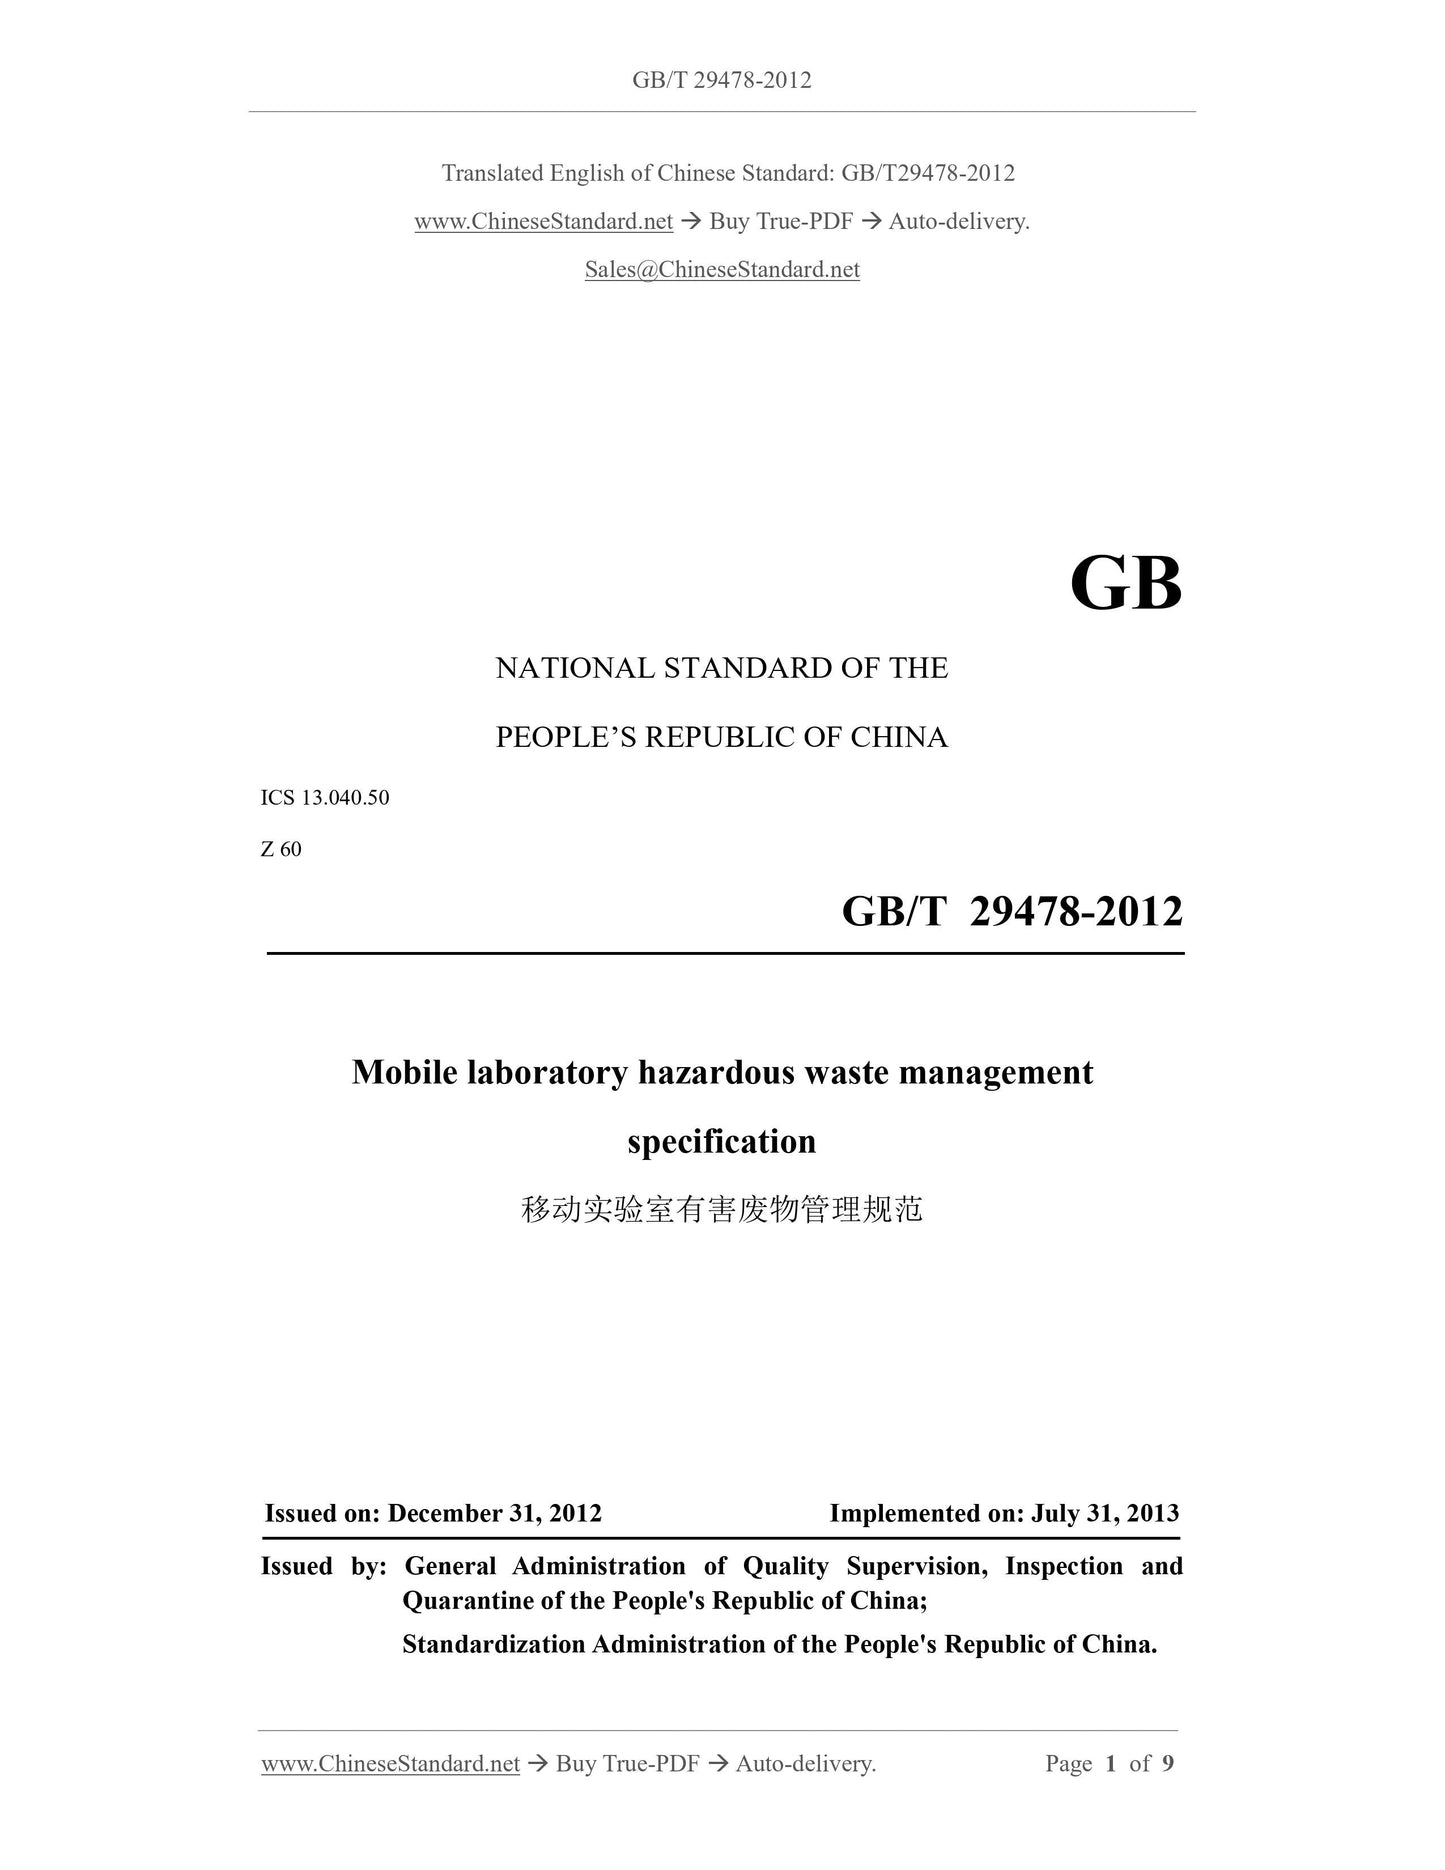 GB/T 29478-2012 Page 1